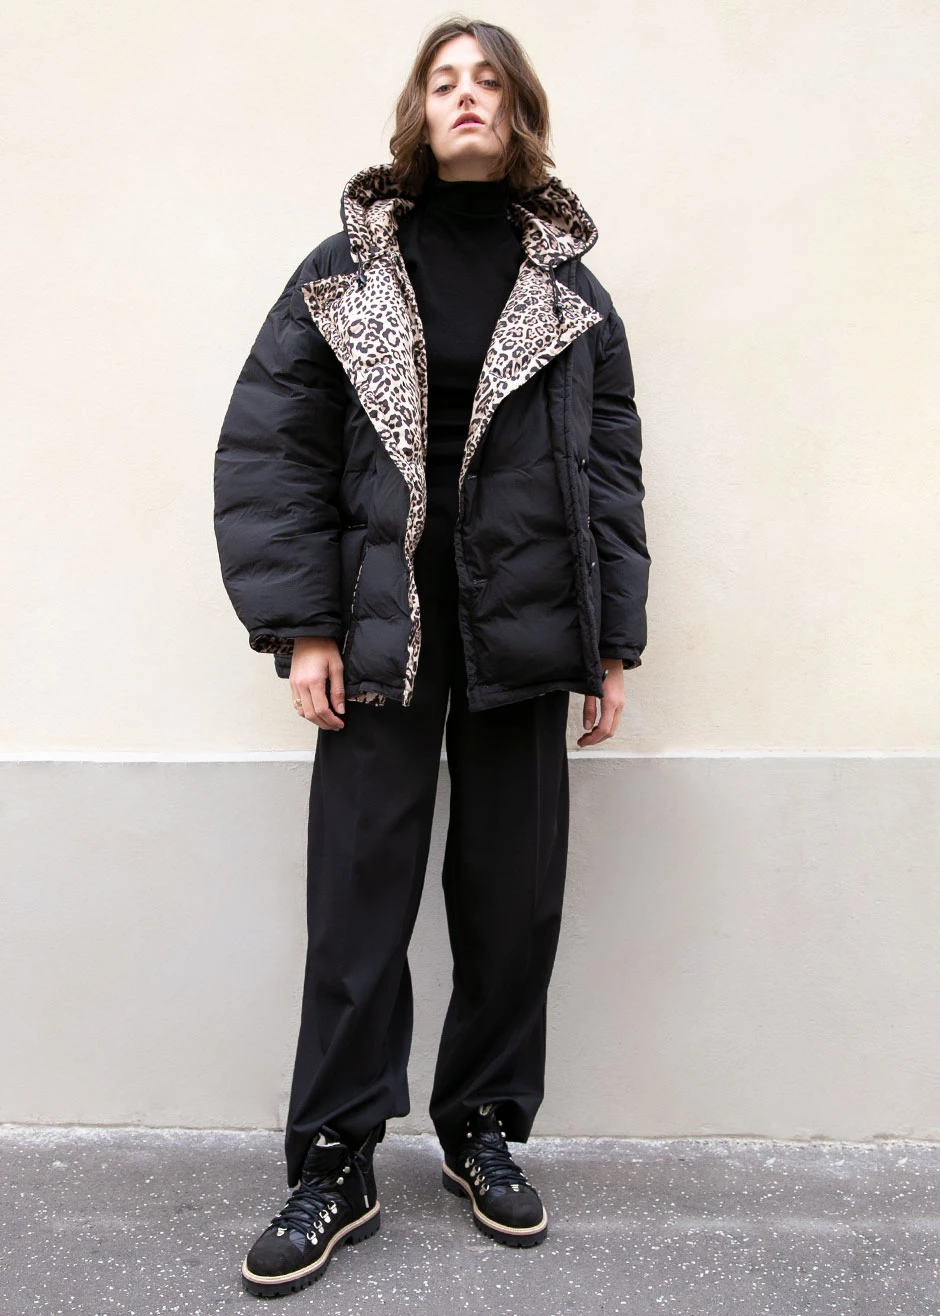 The Frankie Shop + Reversible Leopard Hooded Puffy Jacket